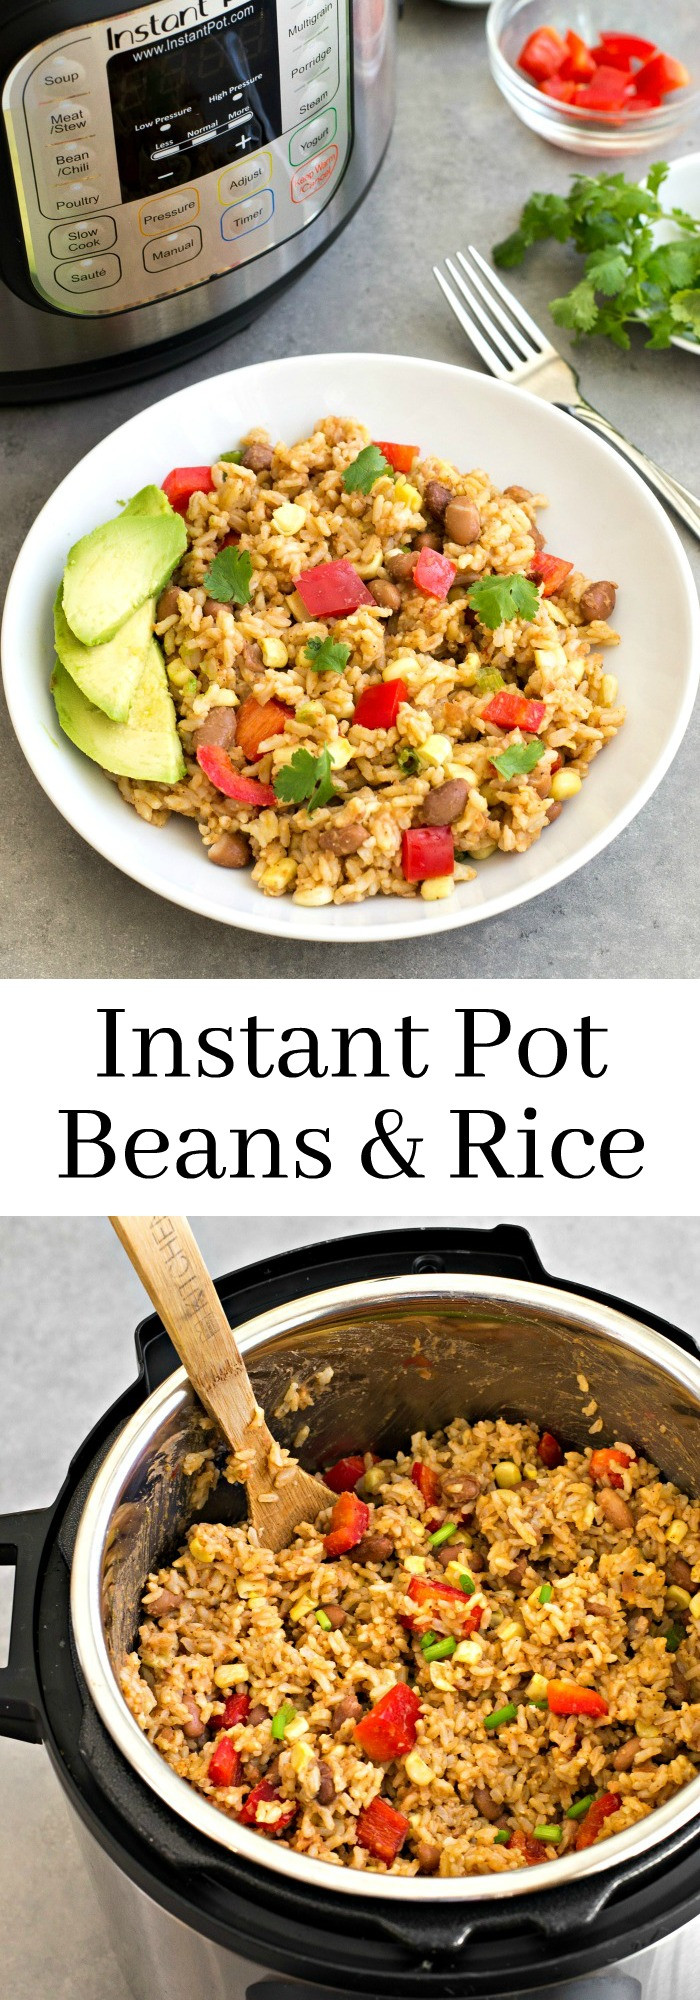 Instant Pot Black Beans And Rice
 Instant Pot Pinto Beans and Rice Easy Vegan Recipe